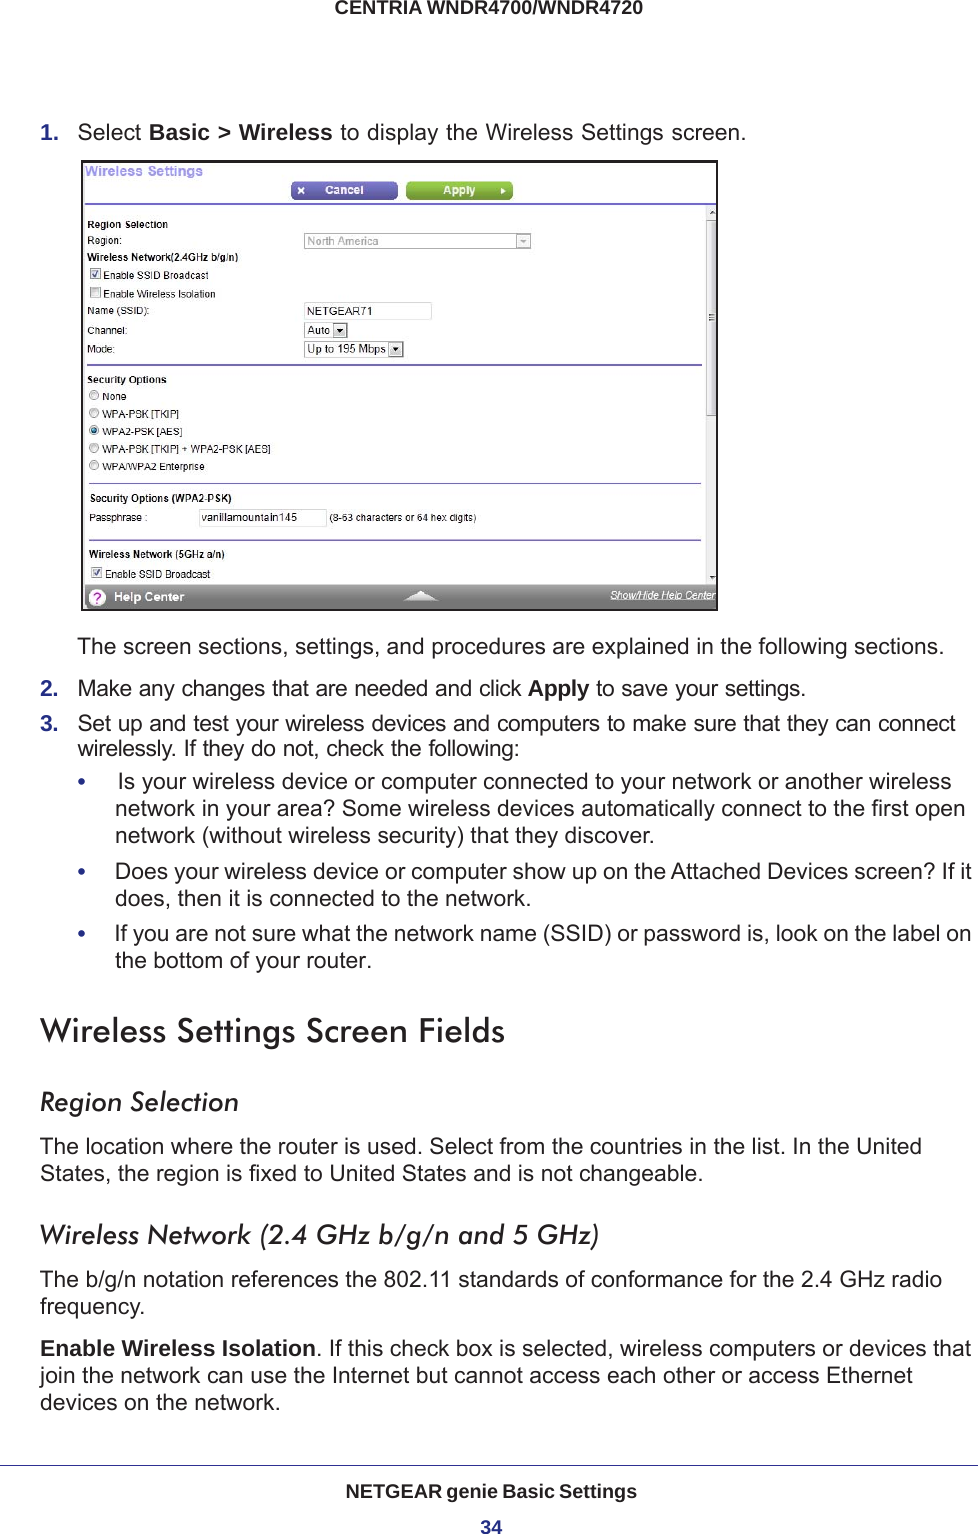 NETGEAR genie Basic Settings34CENTRIA WNDR4700/WNDR4720 1.  Select Basic &gt; Wireless to display the Wireless Settings screen.The screen sections, settings, and procedures are explained in the following sections.2.  Make any changes that are needed and click Apply to save your settings.3.  Set up and test your wireless devices and computers to make sure that they can connect wirelessly. If they do not, check the following:•     Is your wireless device or computer connected to your network or another wireless network in your area? Some wireless devices automatically connect to the first open network (without wireless security) that they discover.•     Does your wireless device or computer show up on the Attached Devices screen? If it does, then it is connected to the network.•     If you are not sure what the network name (SSID) or password is, look on the label on the bottom of your router.Wireless Settings Screen FieldsRegion SelectionThe location where the router is used. Select from the countries in the list. In the United States, the region is fixed to United States and is not changeable.Wireless Network (2.4 GHz b/g/n and 5 GHz)The b/g/n notation references the 802.11 standards of conformance for the 2.4 GHz radio frequency.Enable Wireless Isolation. If this check box is selected, wireless computers or devices that join the network can use the Internet but cannot access each other or access Ethernet devices on the network.